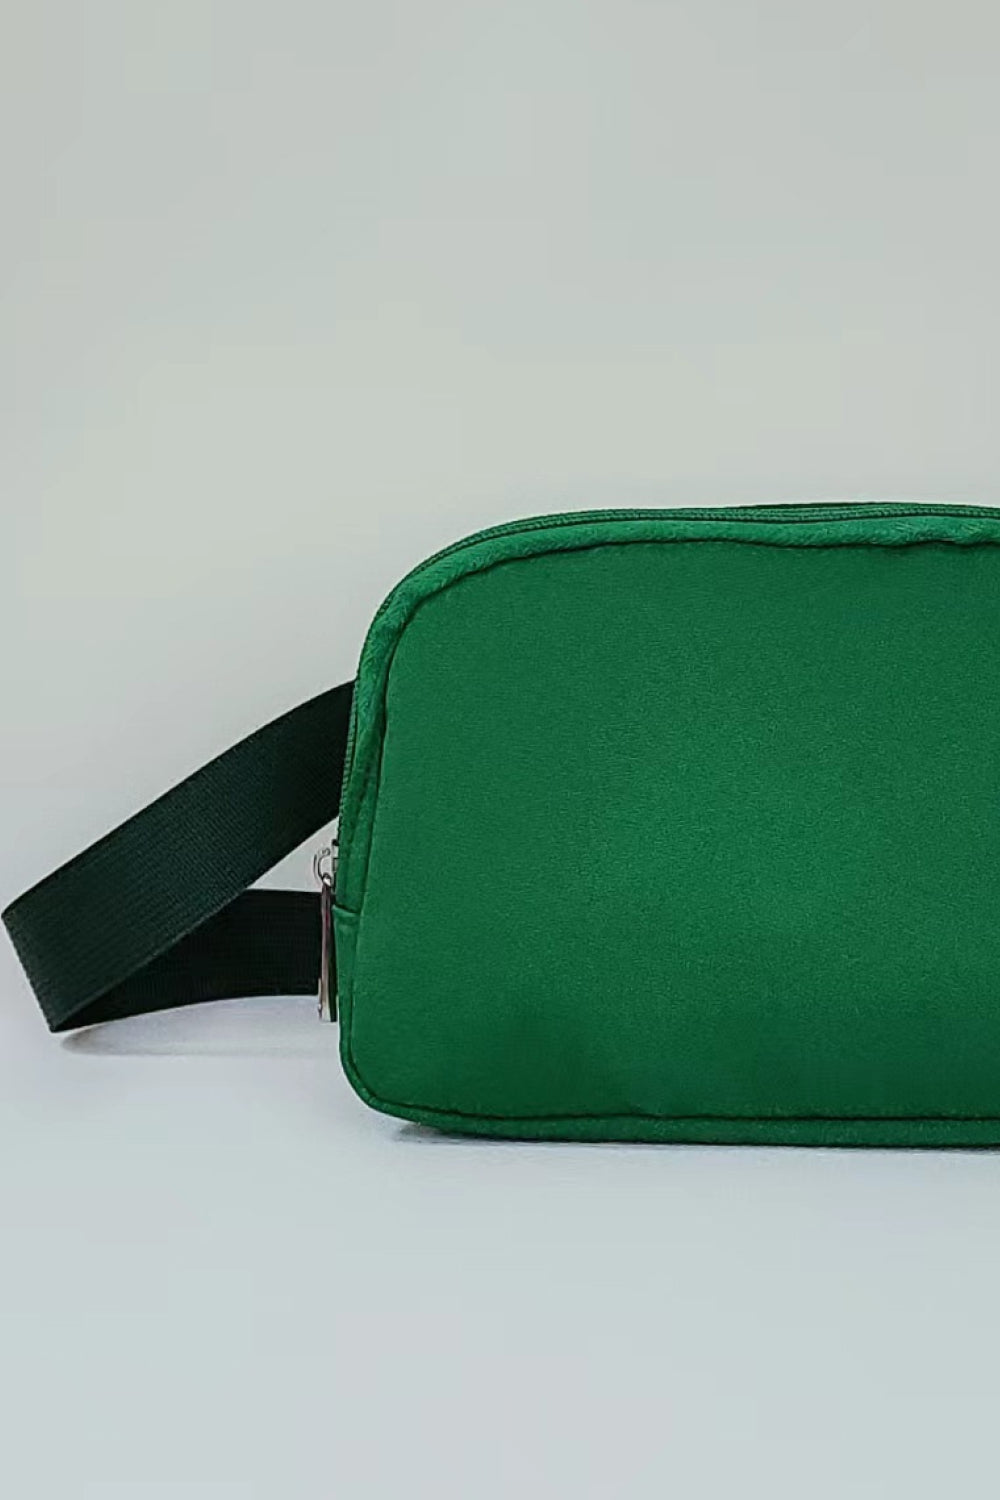 Buckle Zip Closure Fanny Pack - The Teal Antler Boutique